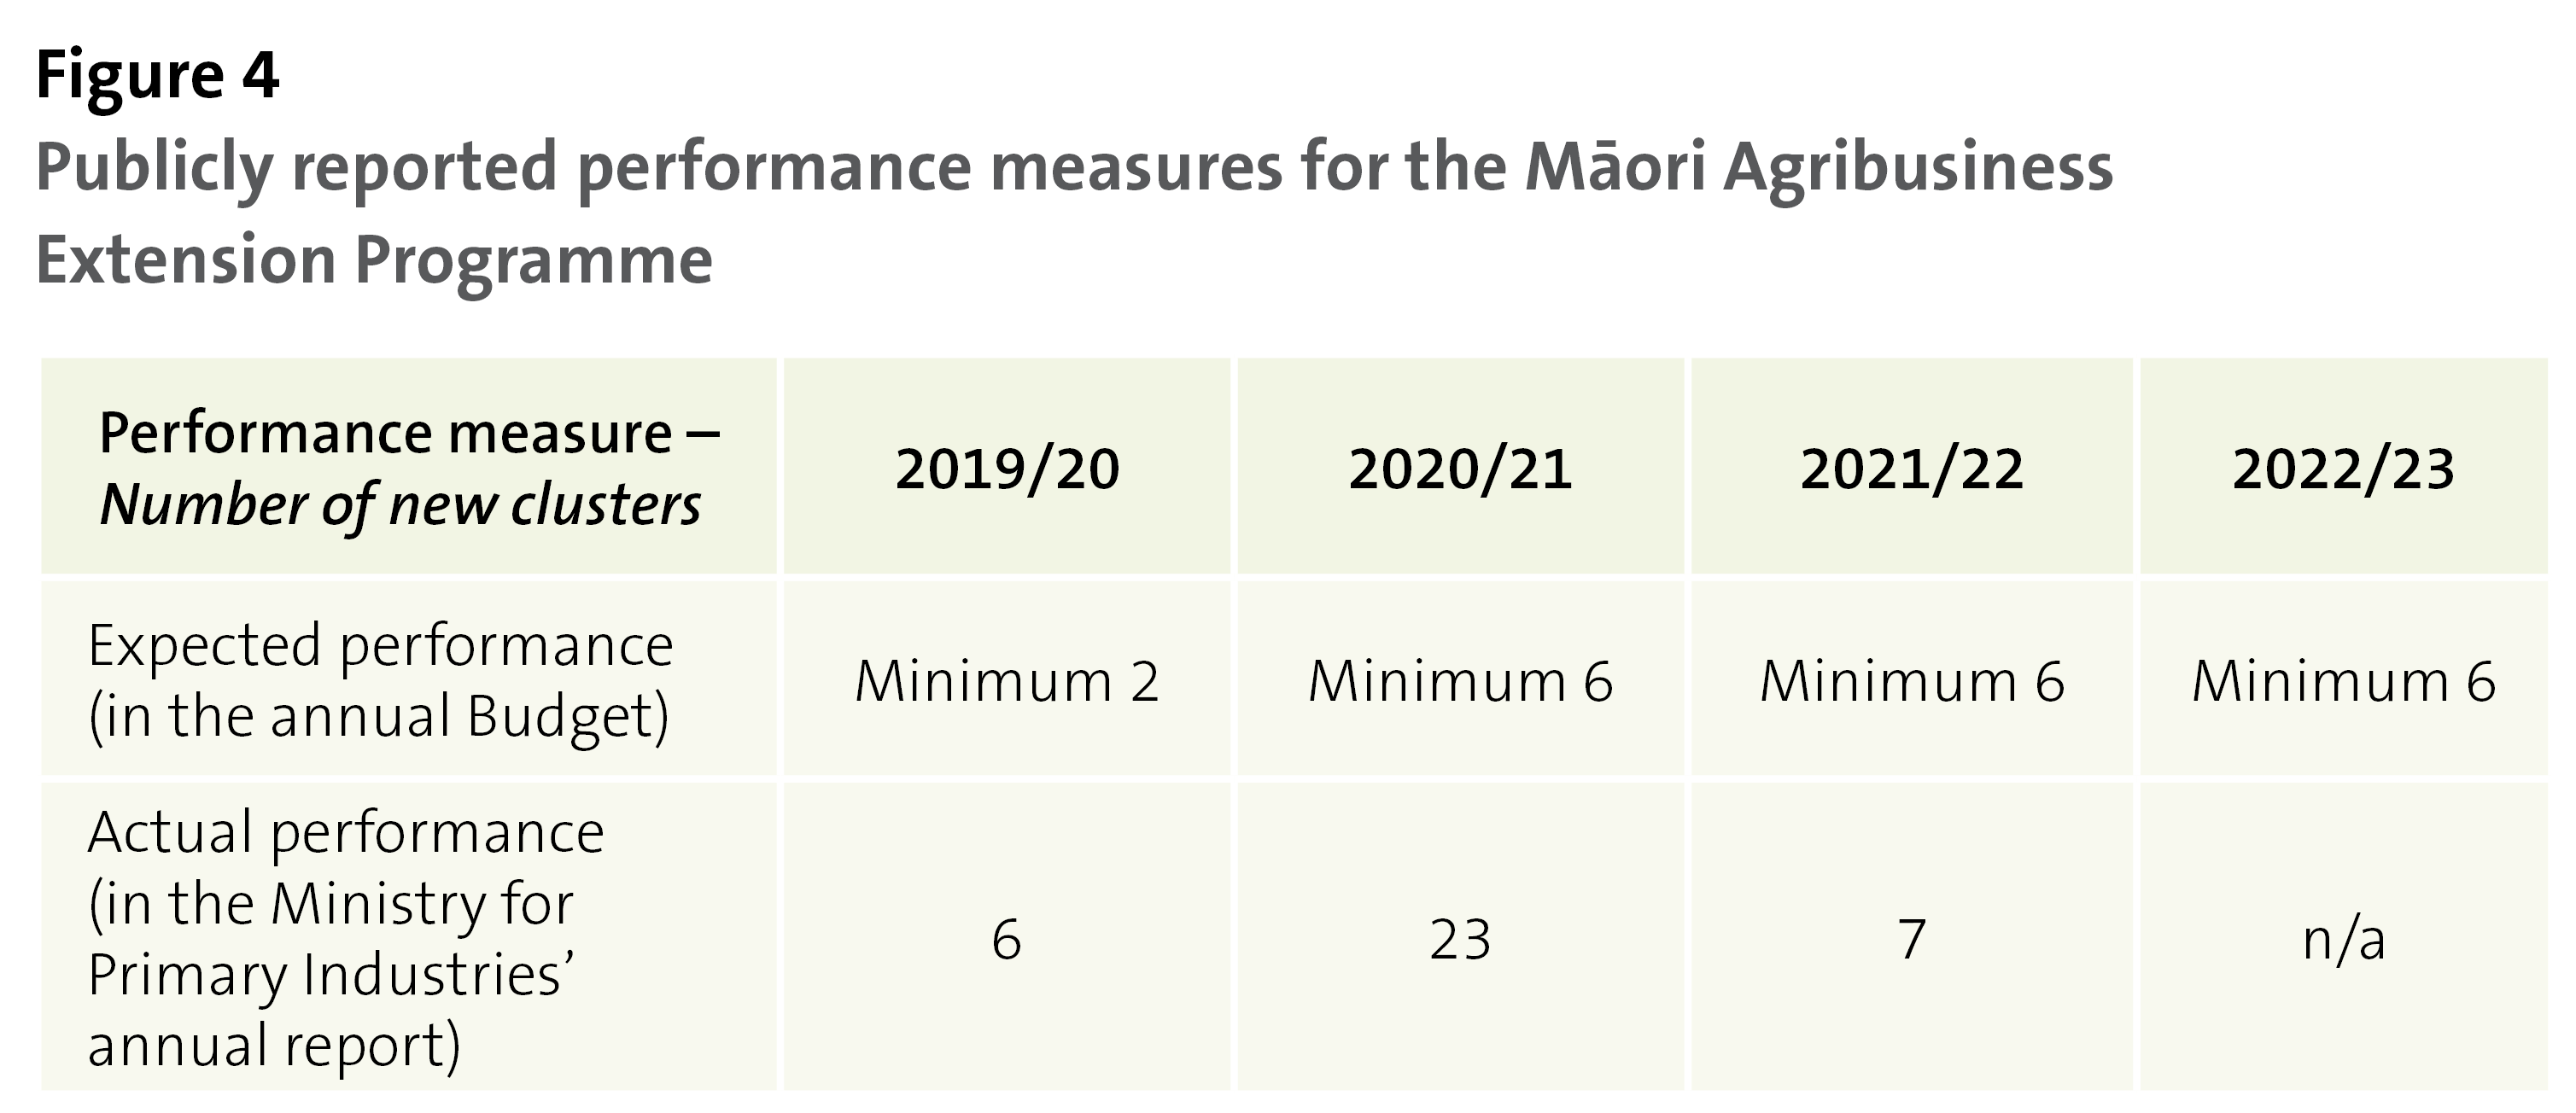 Figure 4 - Publicly reported performance measures for the Māori Agribusiness Extension Programme